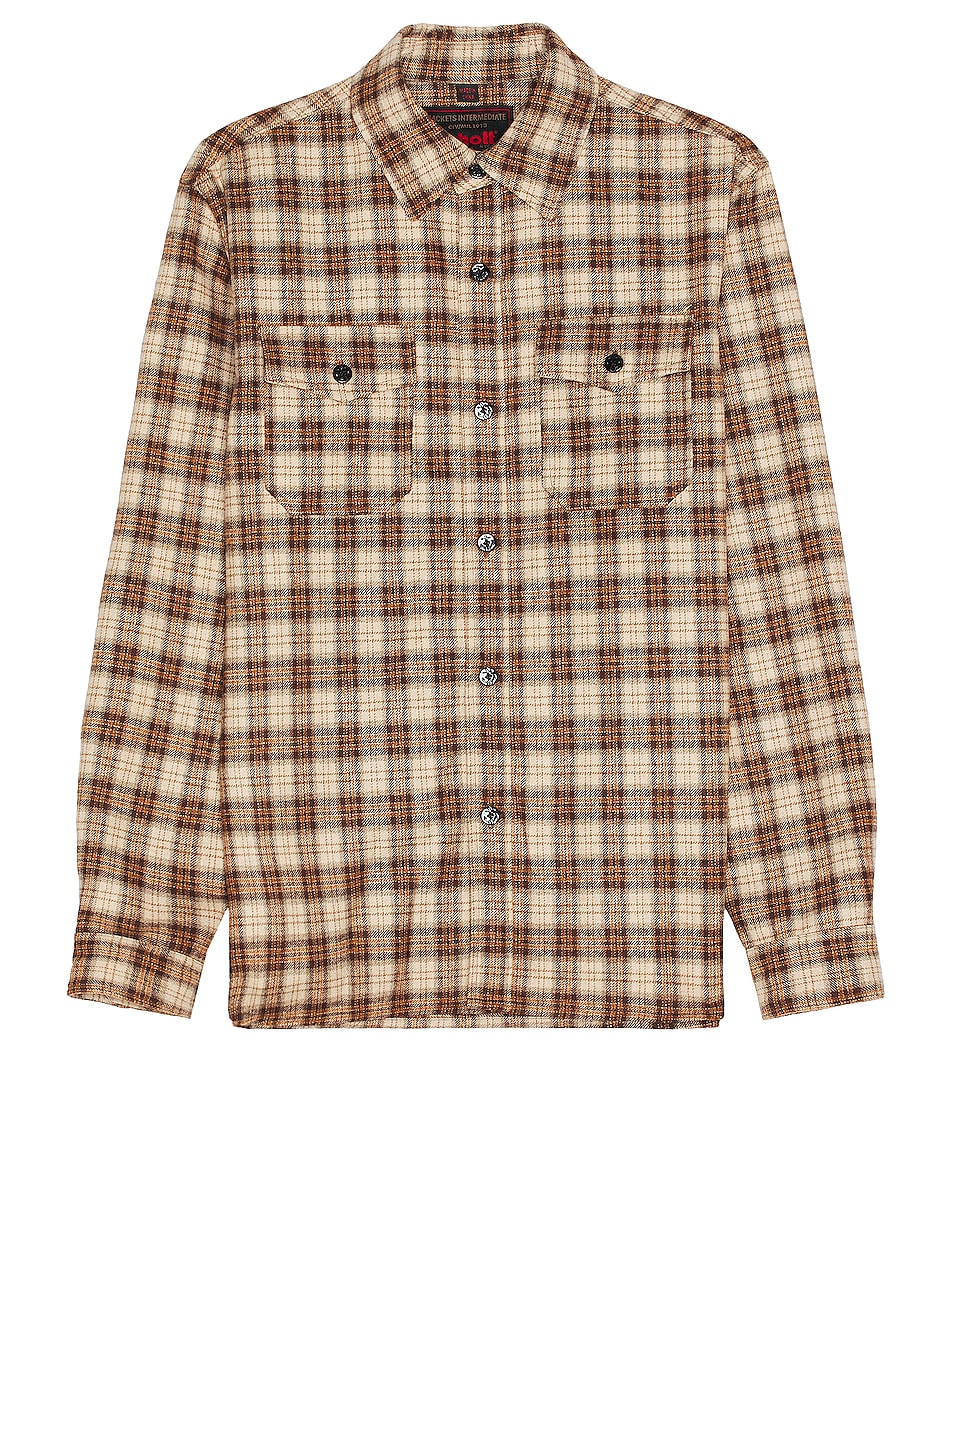 Image 1 of Schott NYC Plaid Cpo Shirt in Tan